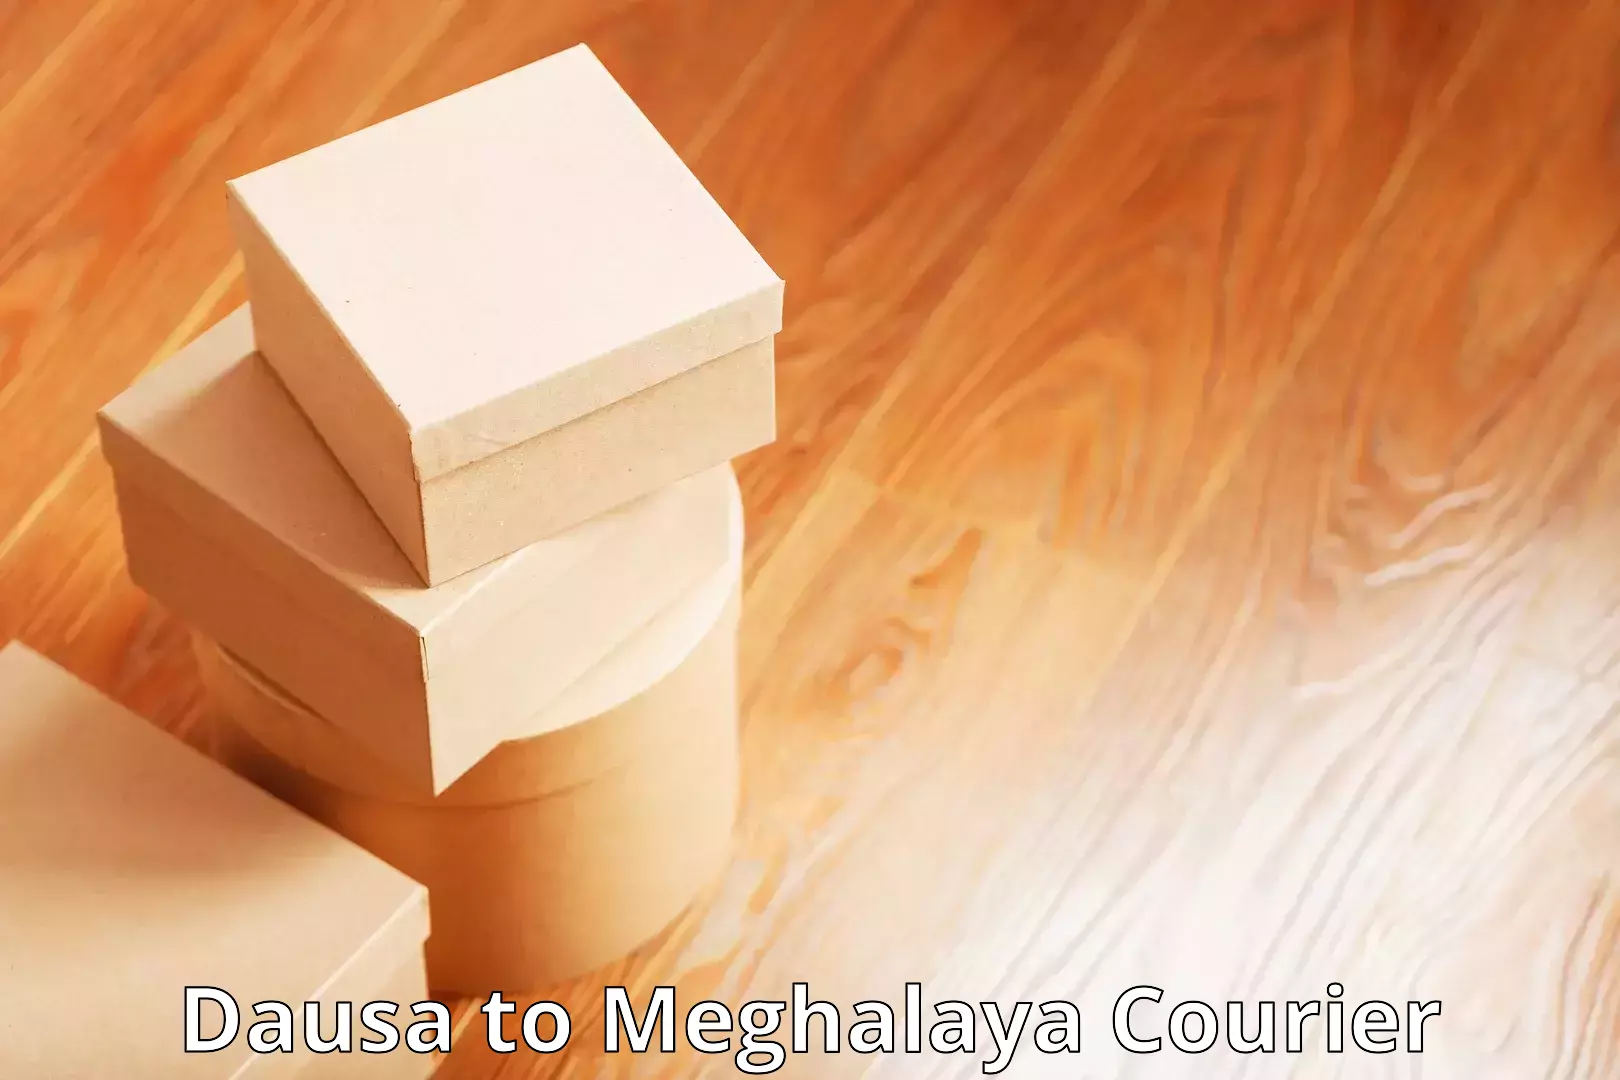 Express delivery capabilities Dausa to Meghalaya